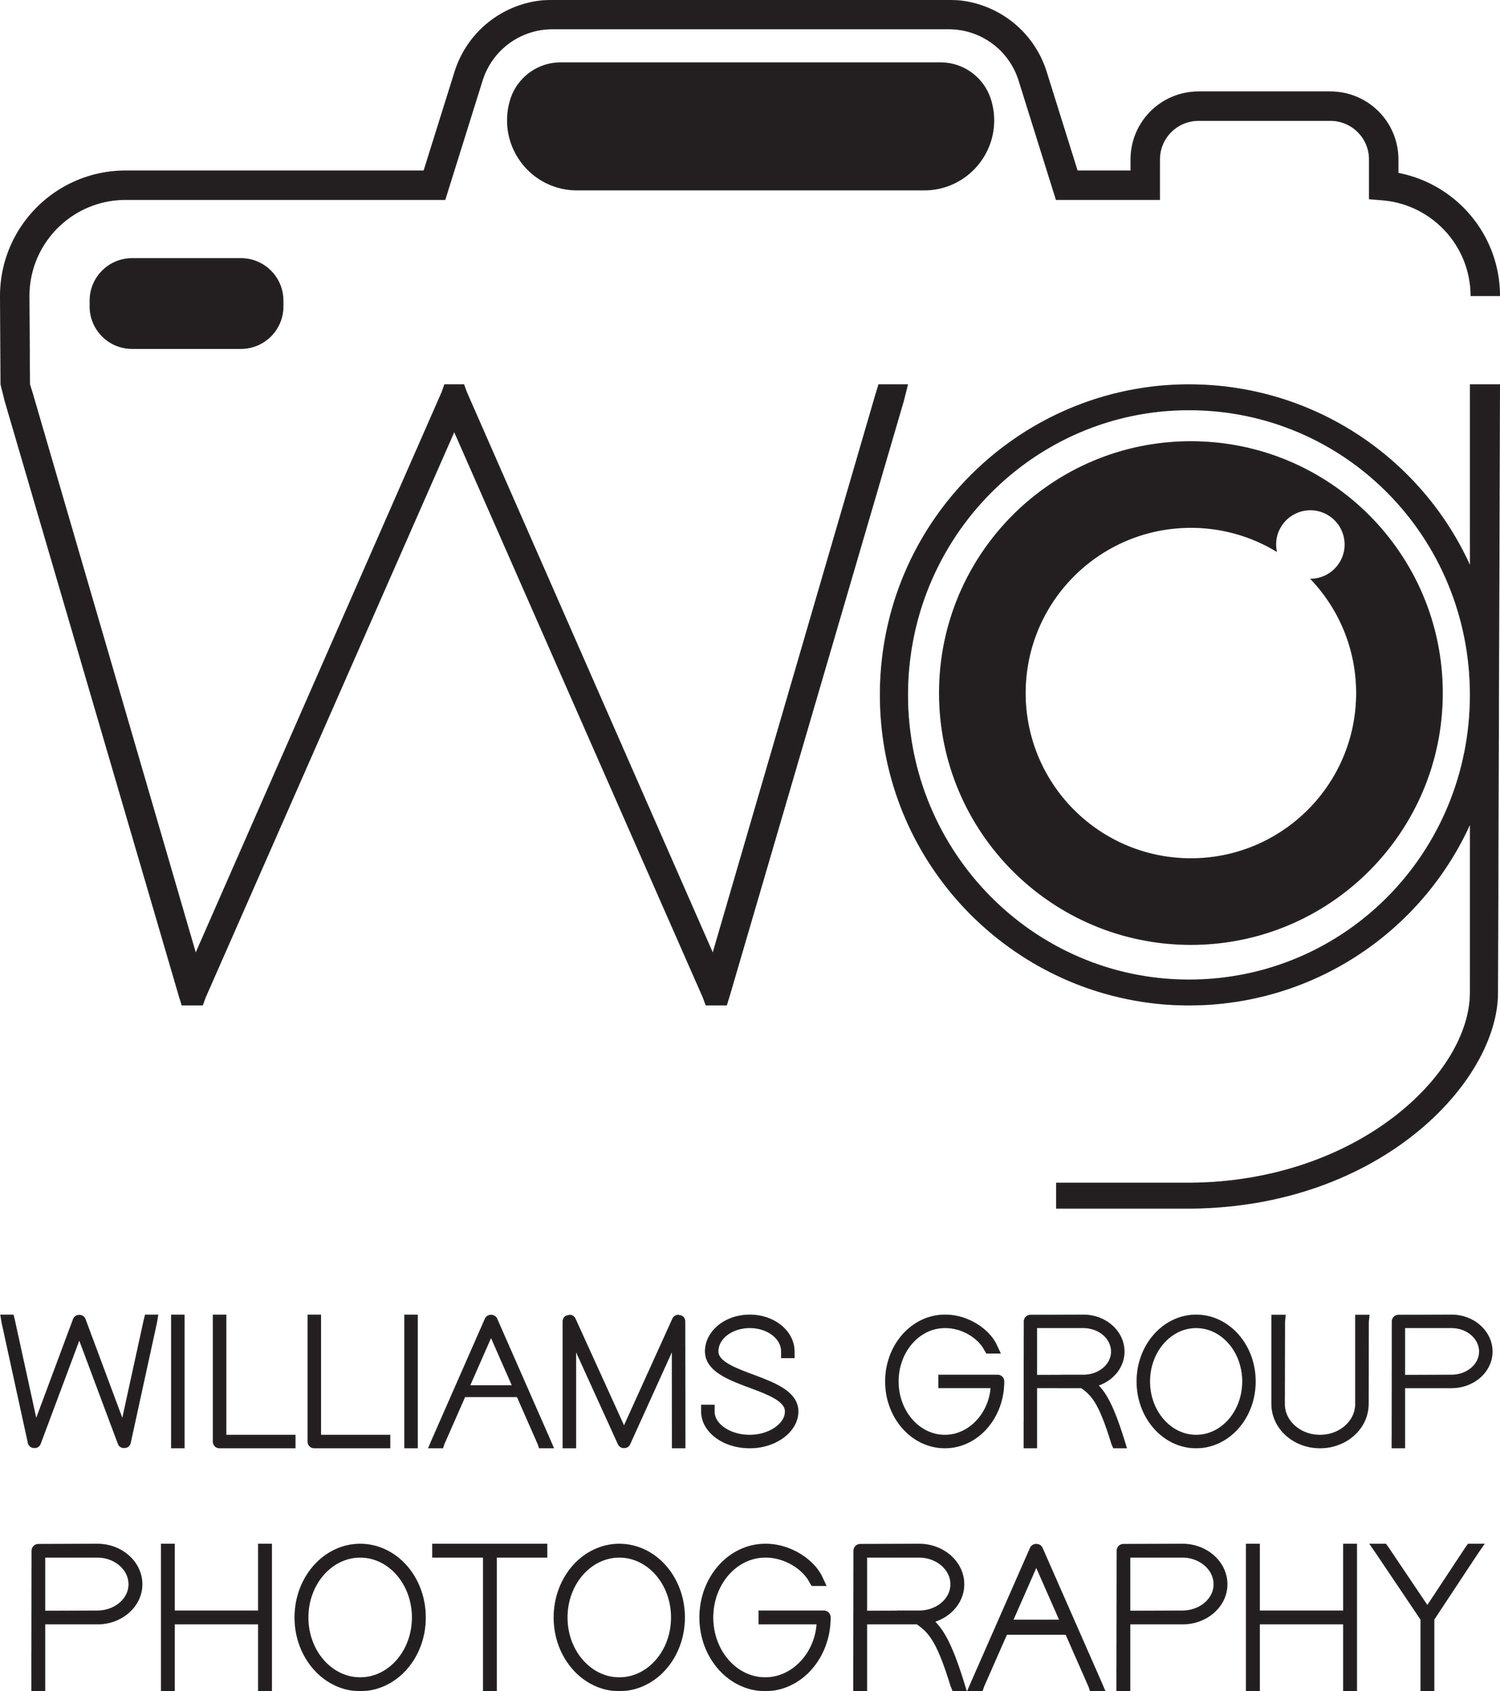 Williams Group Photography